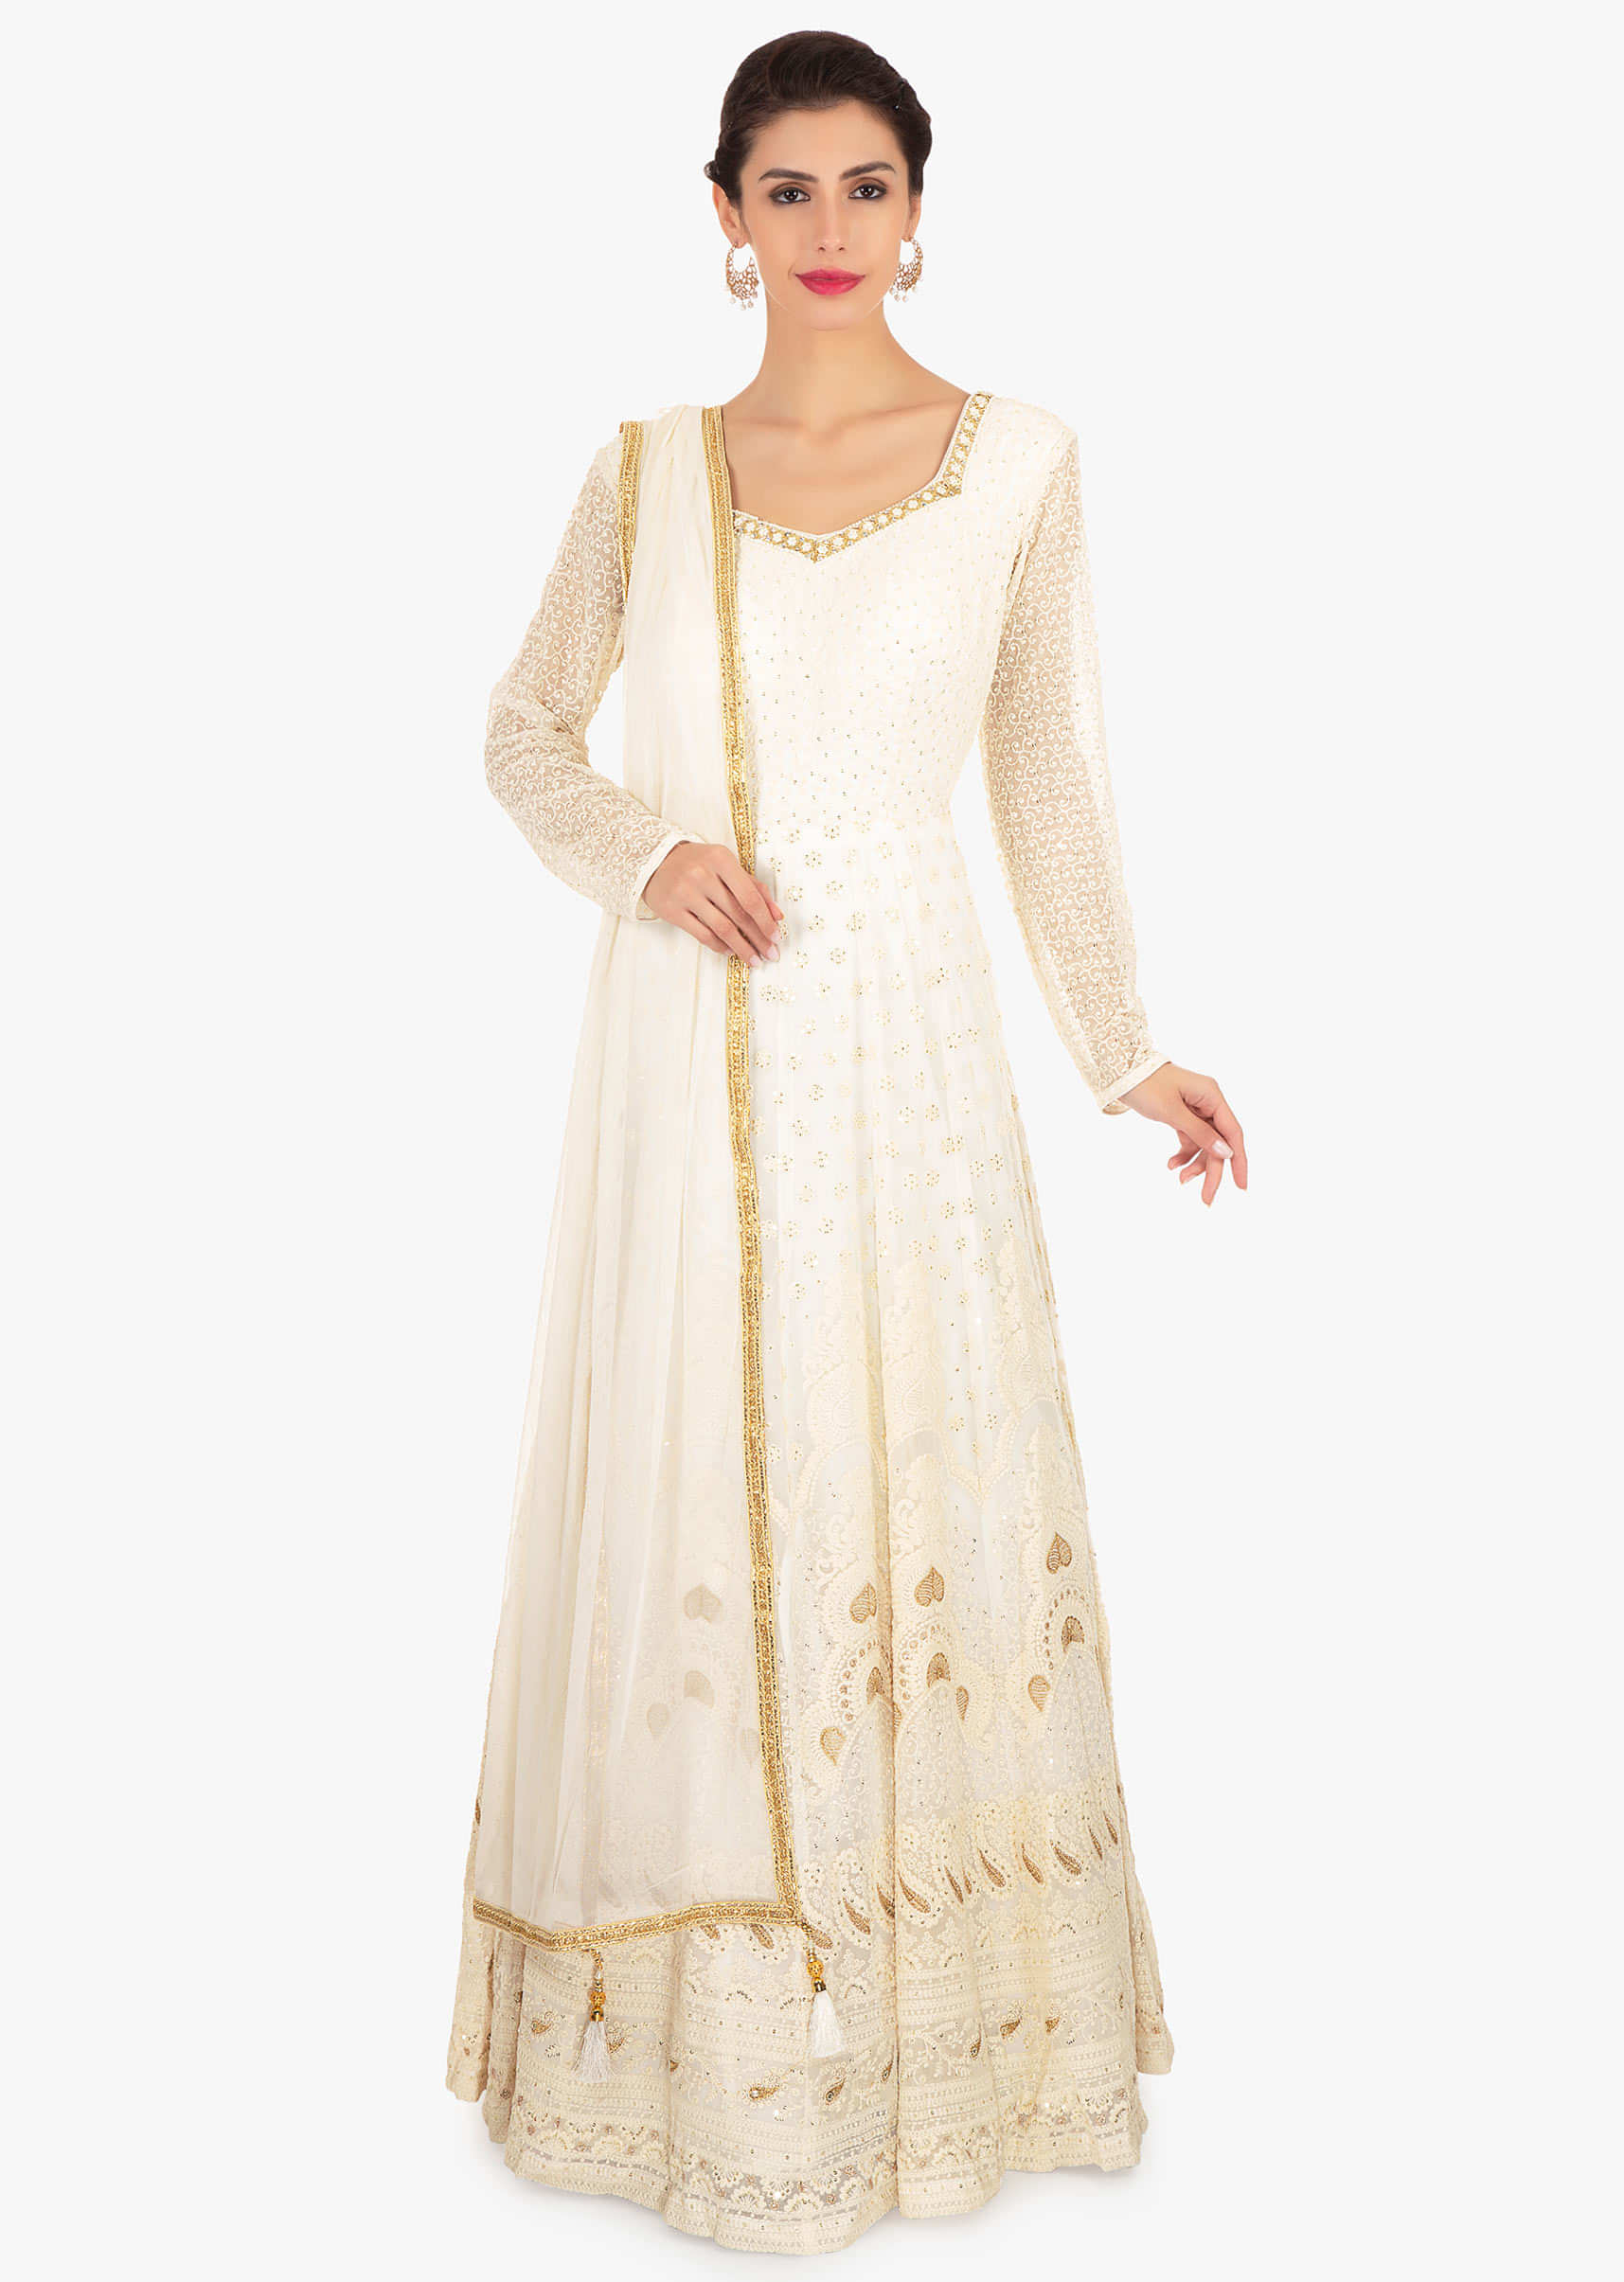 Off white georgette anarkali paired with a net dupatta in lace